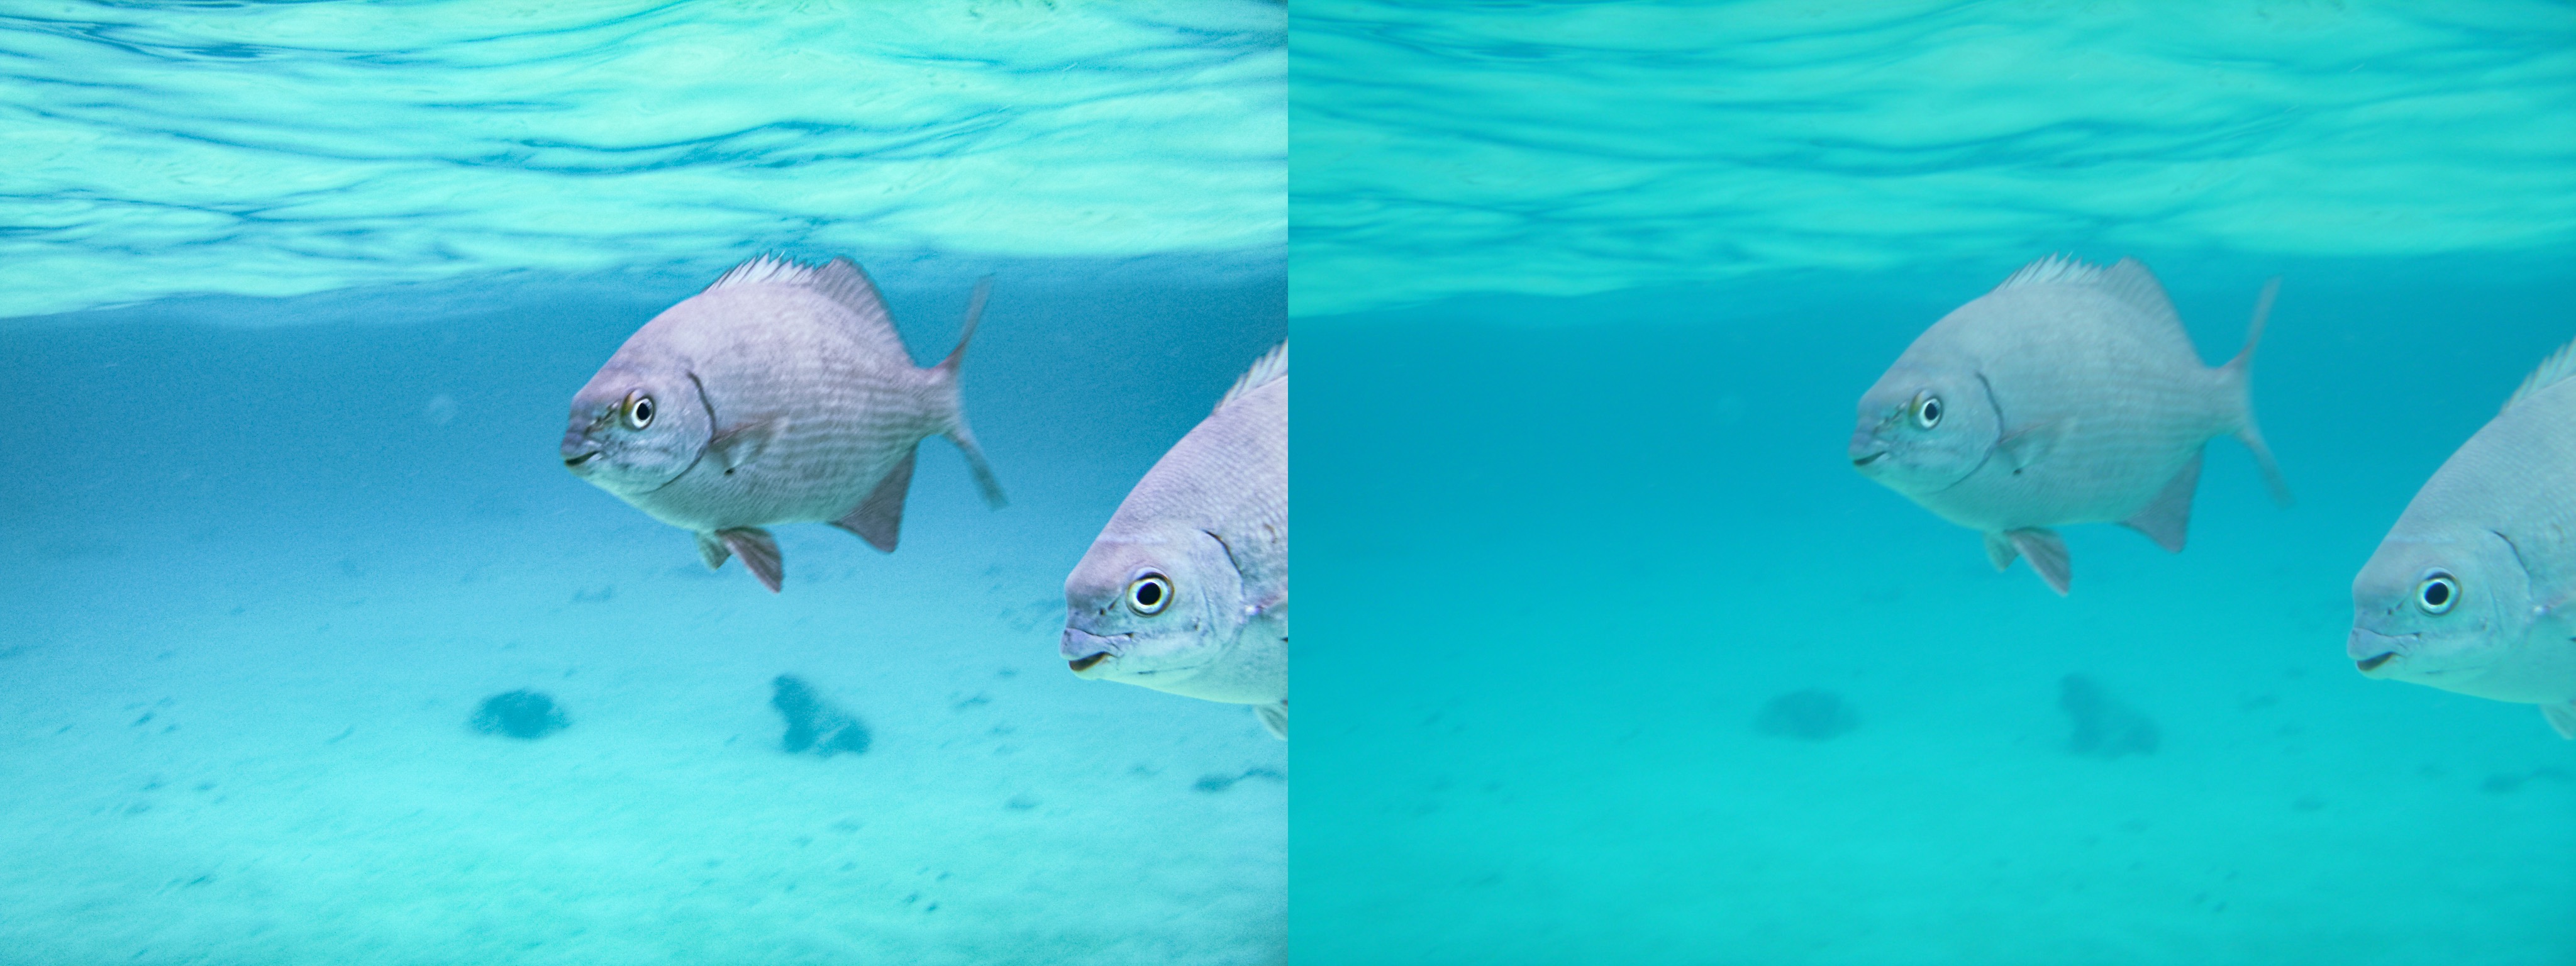 Underwater photograph of a fish in the center of frame, and a fish entering the screen right side of frame. Another version of the photo is next to it without corrections and it's basically all teal.